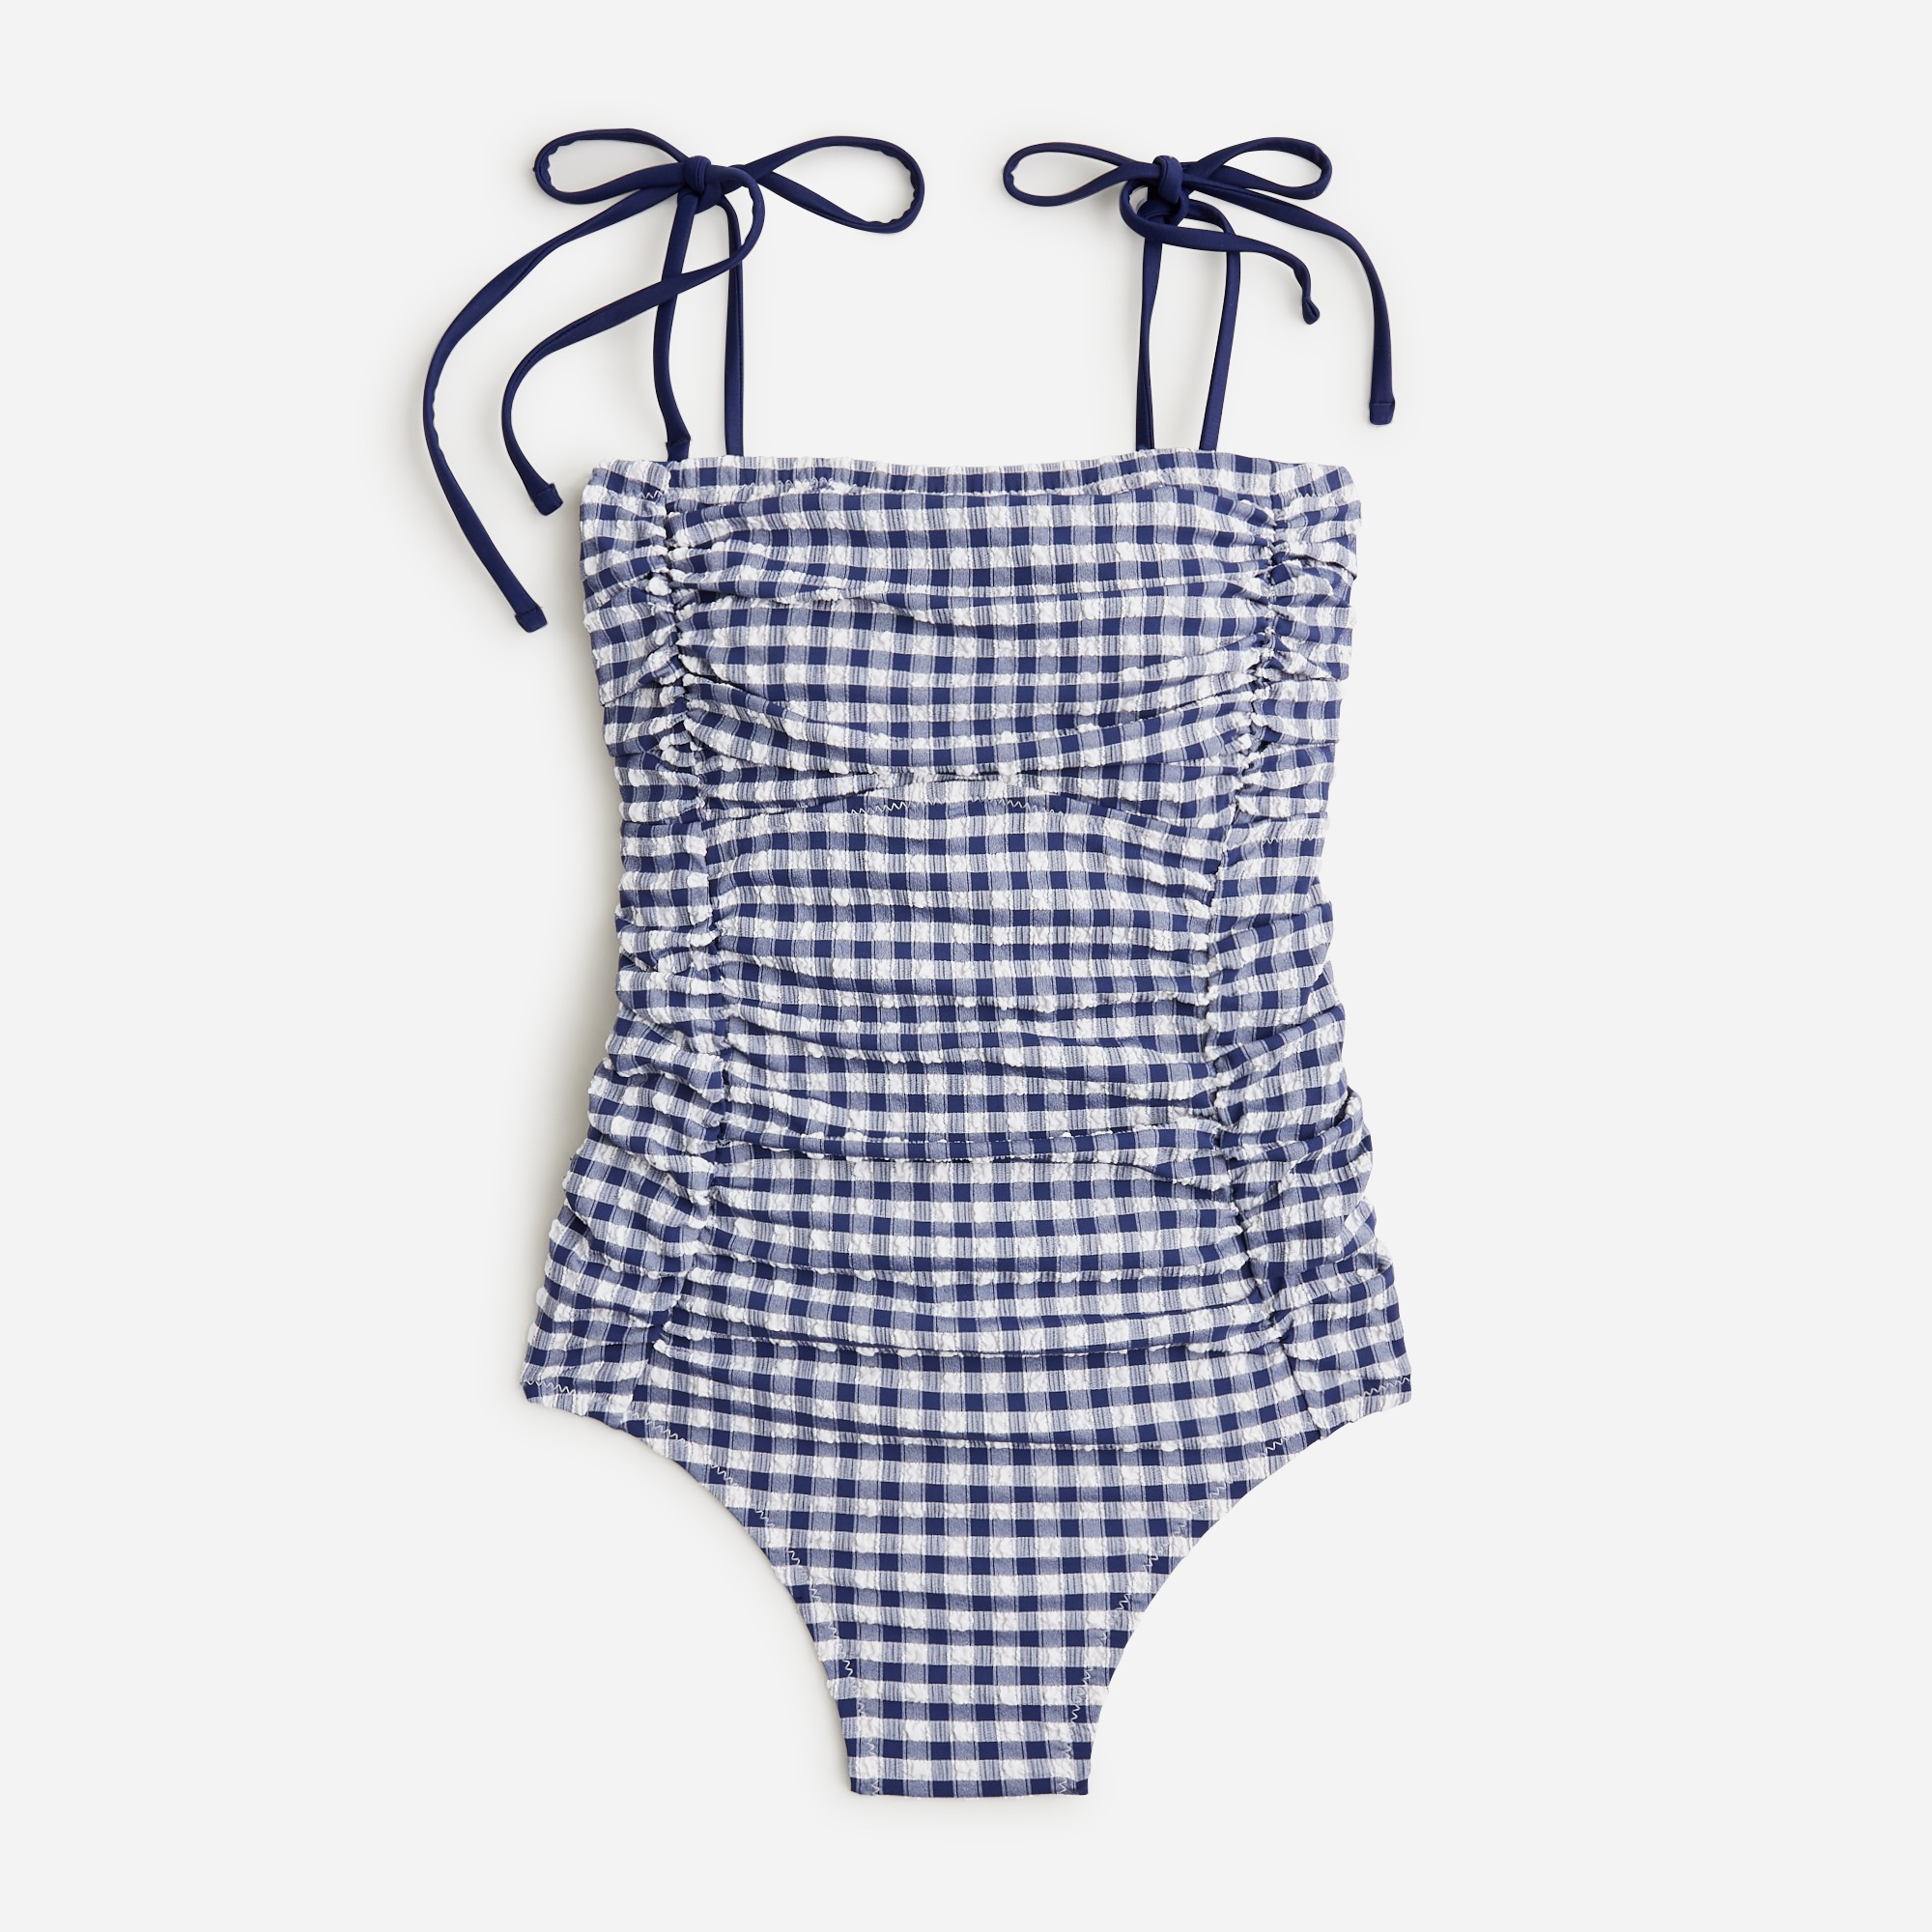  Ruched tie-shoulder one-piece swimsuit in gingham